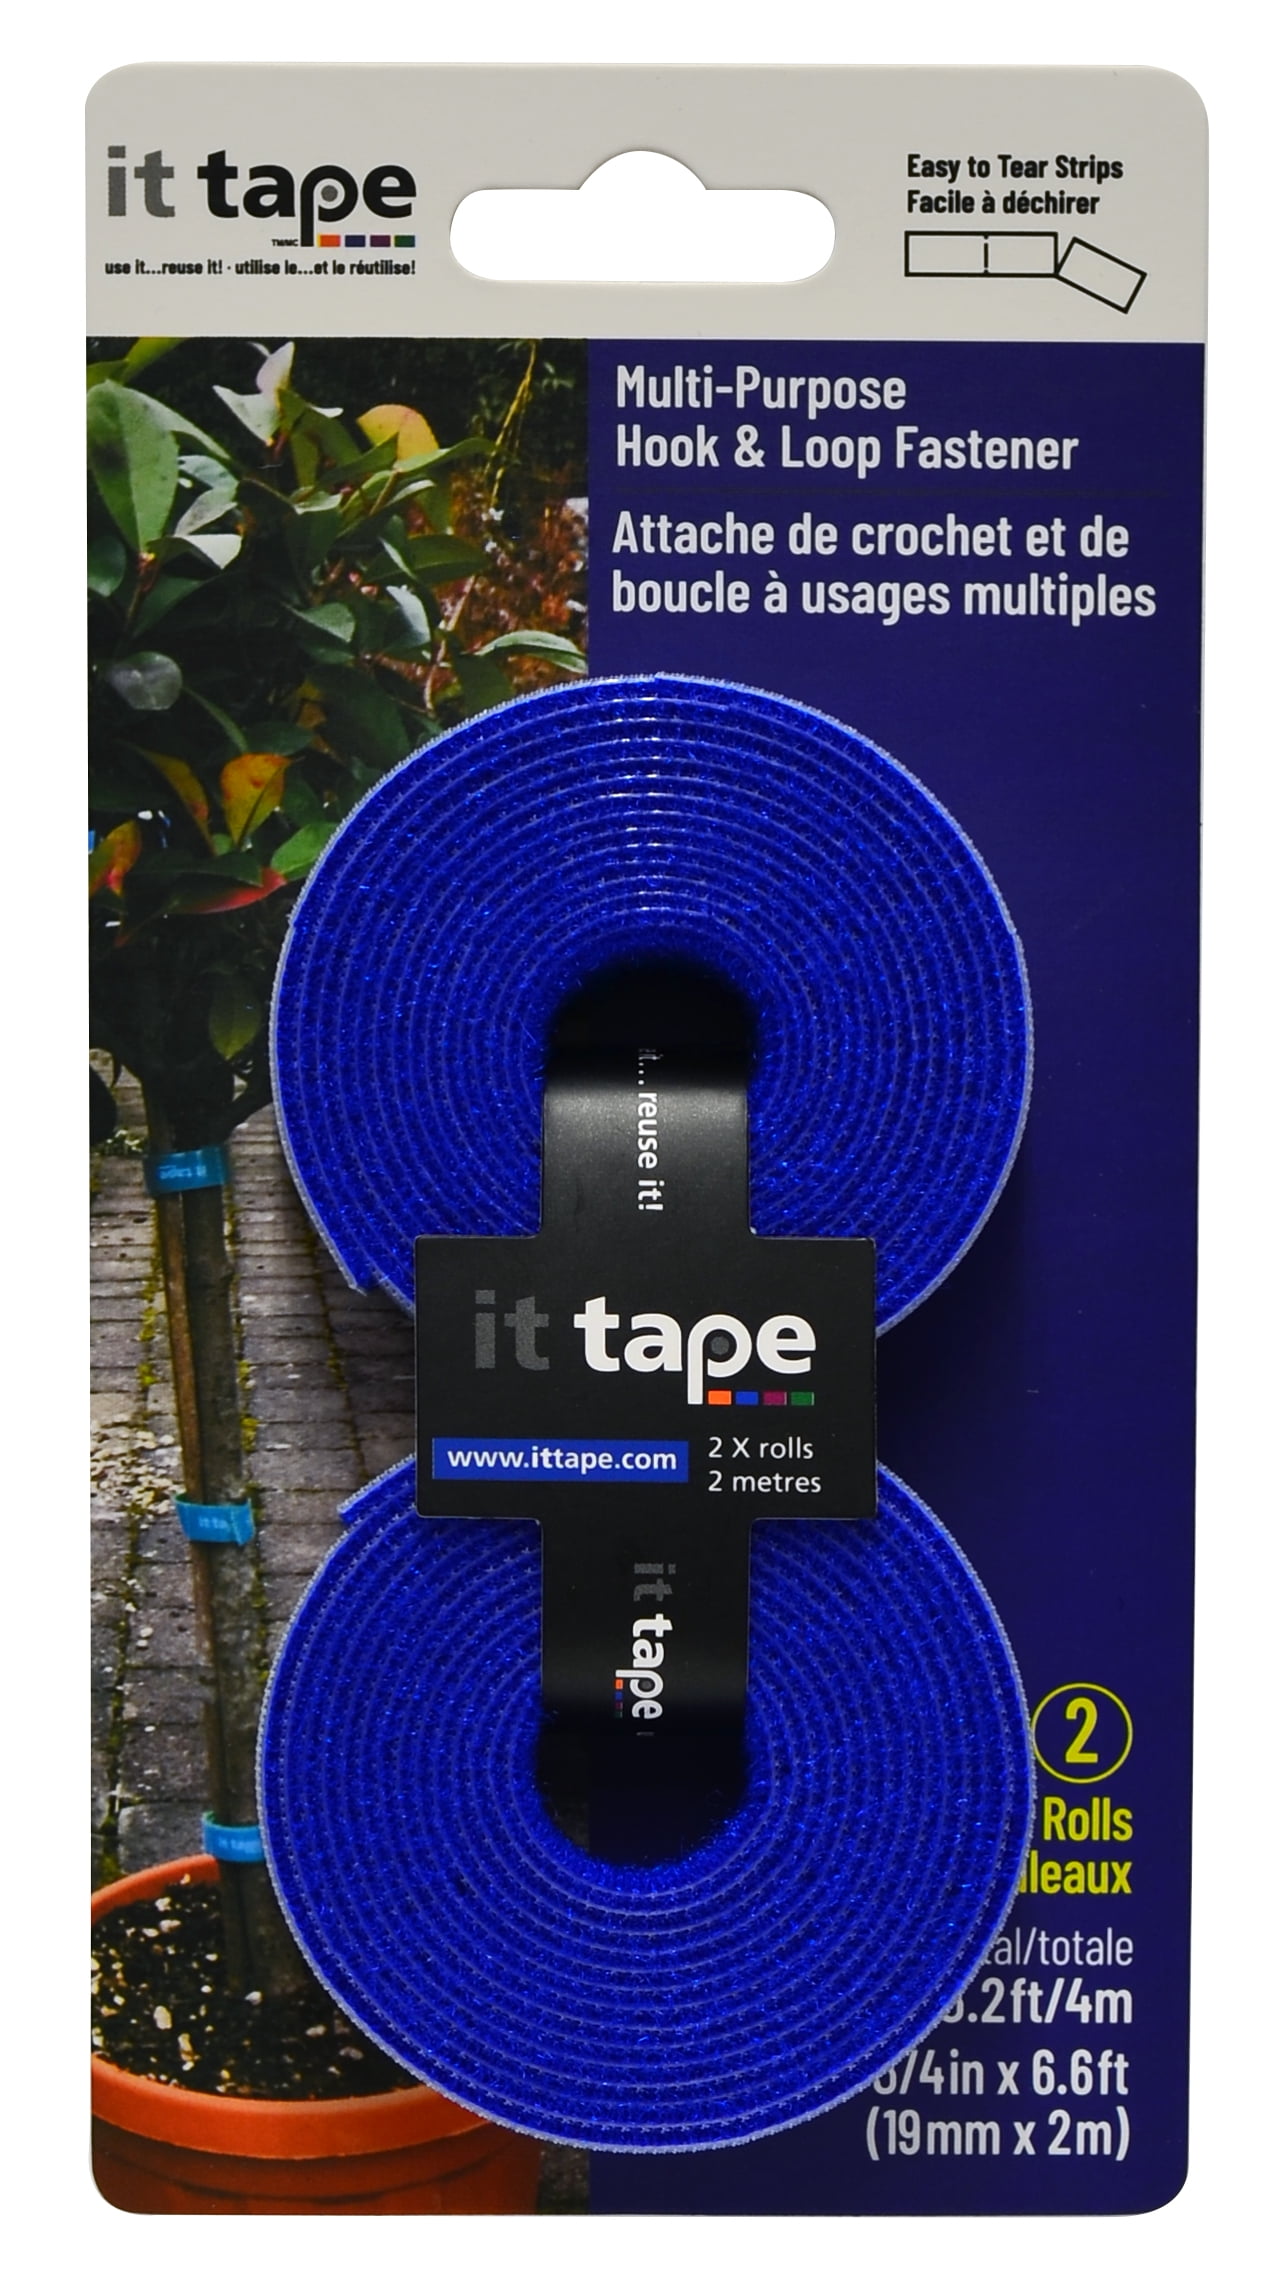 12 Sets 2x4 inch Strips with Adhesive Heavy Duty Hook and Loop